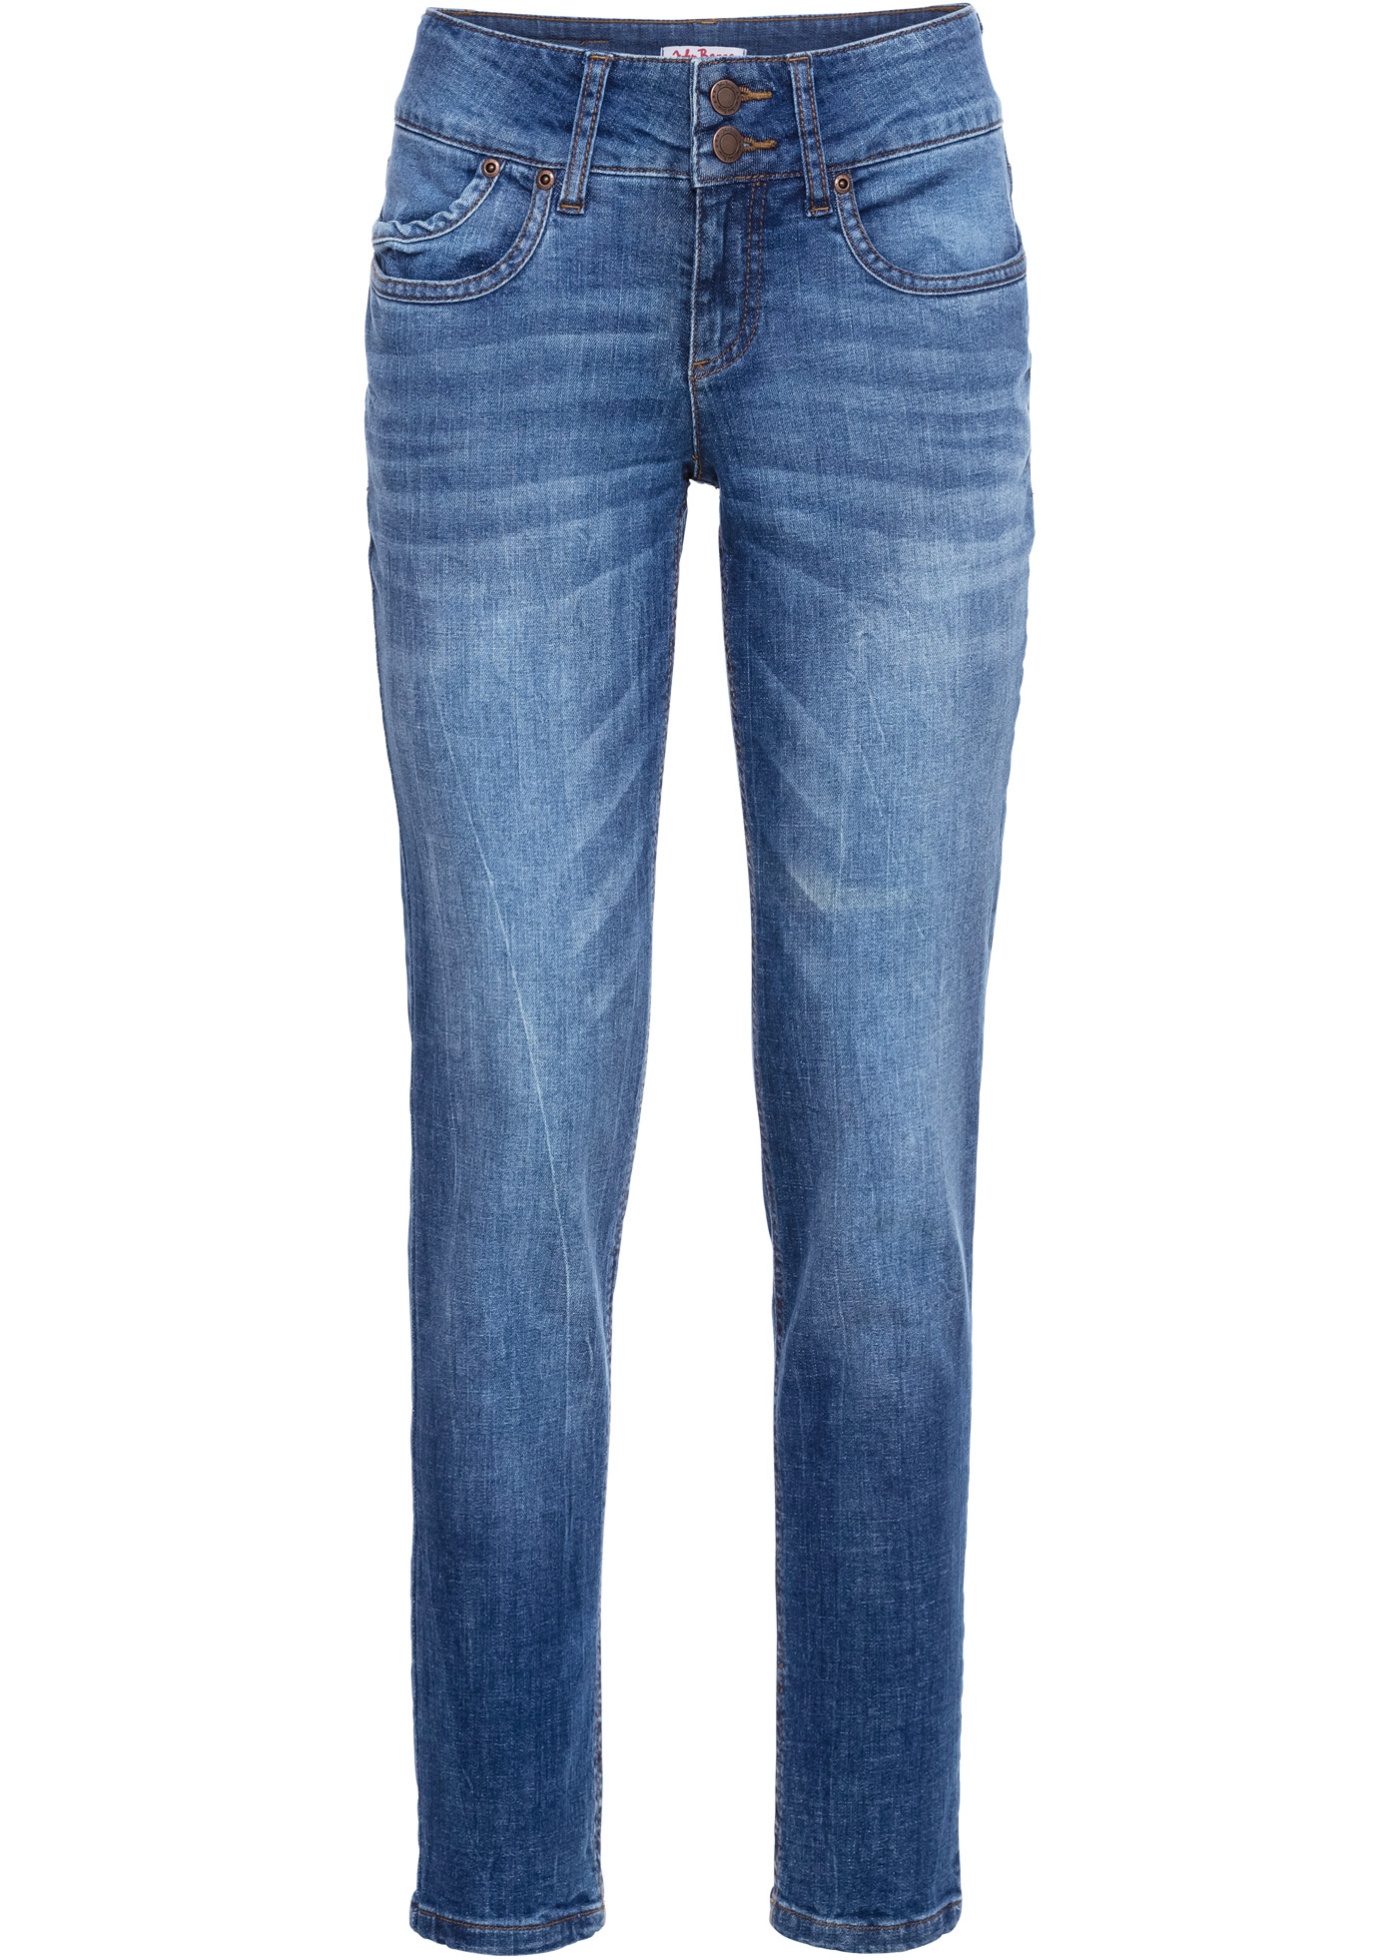 Jean extensible, CLASSIC